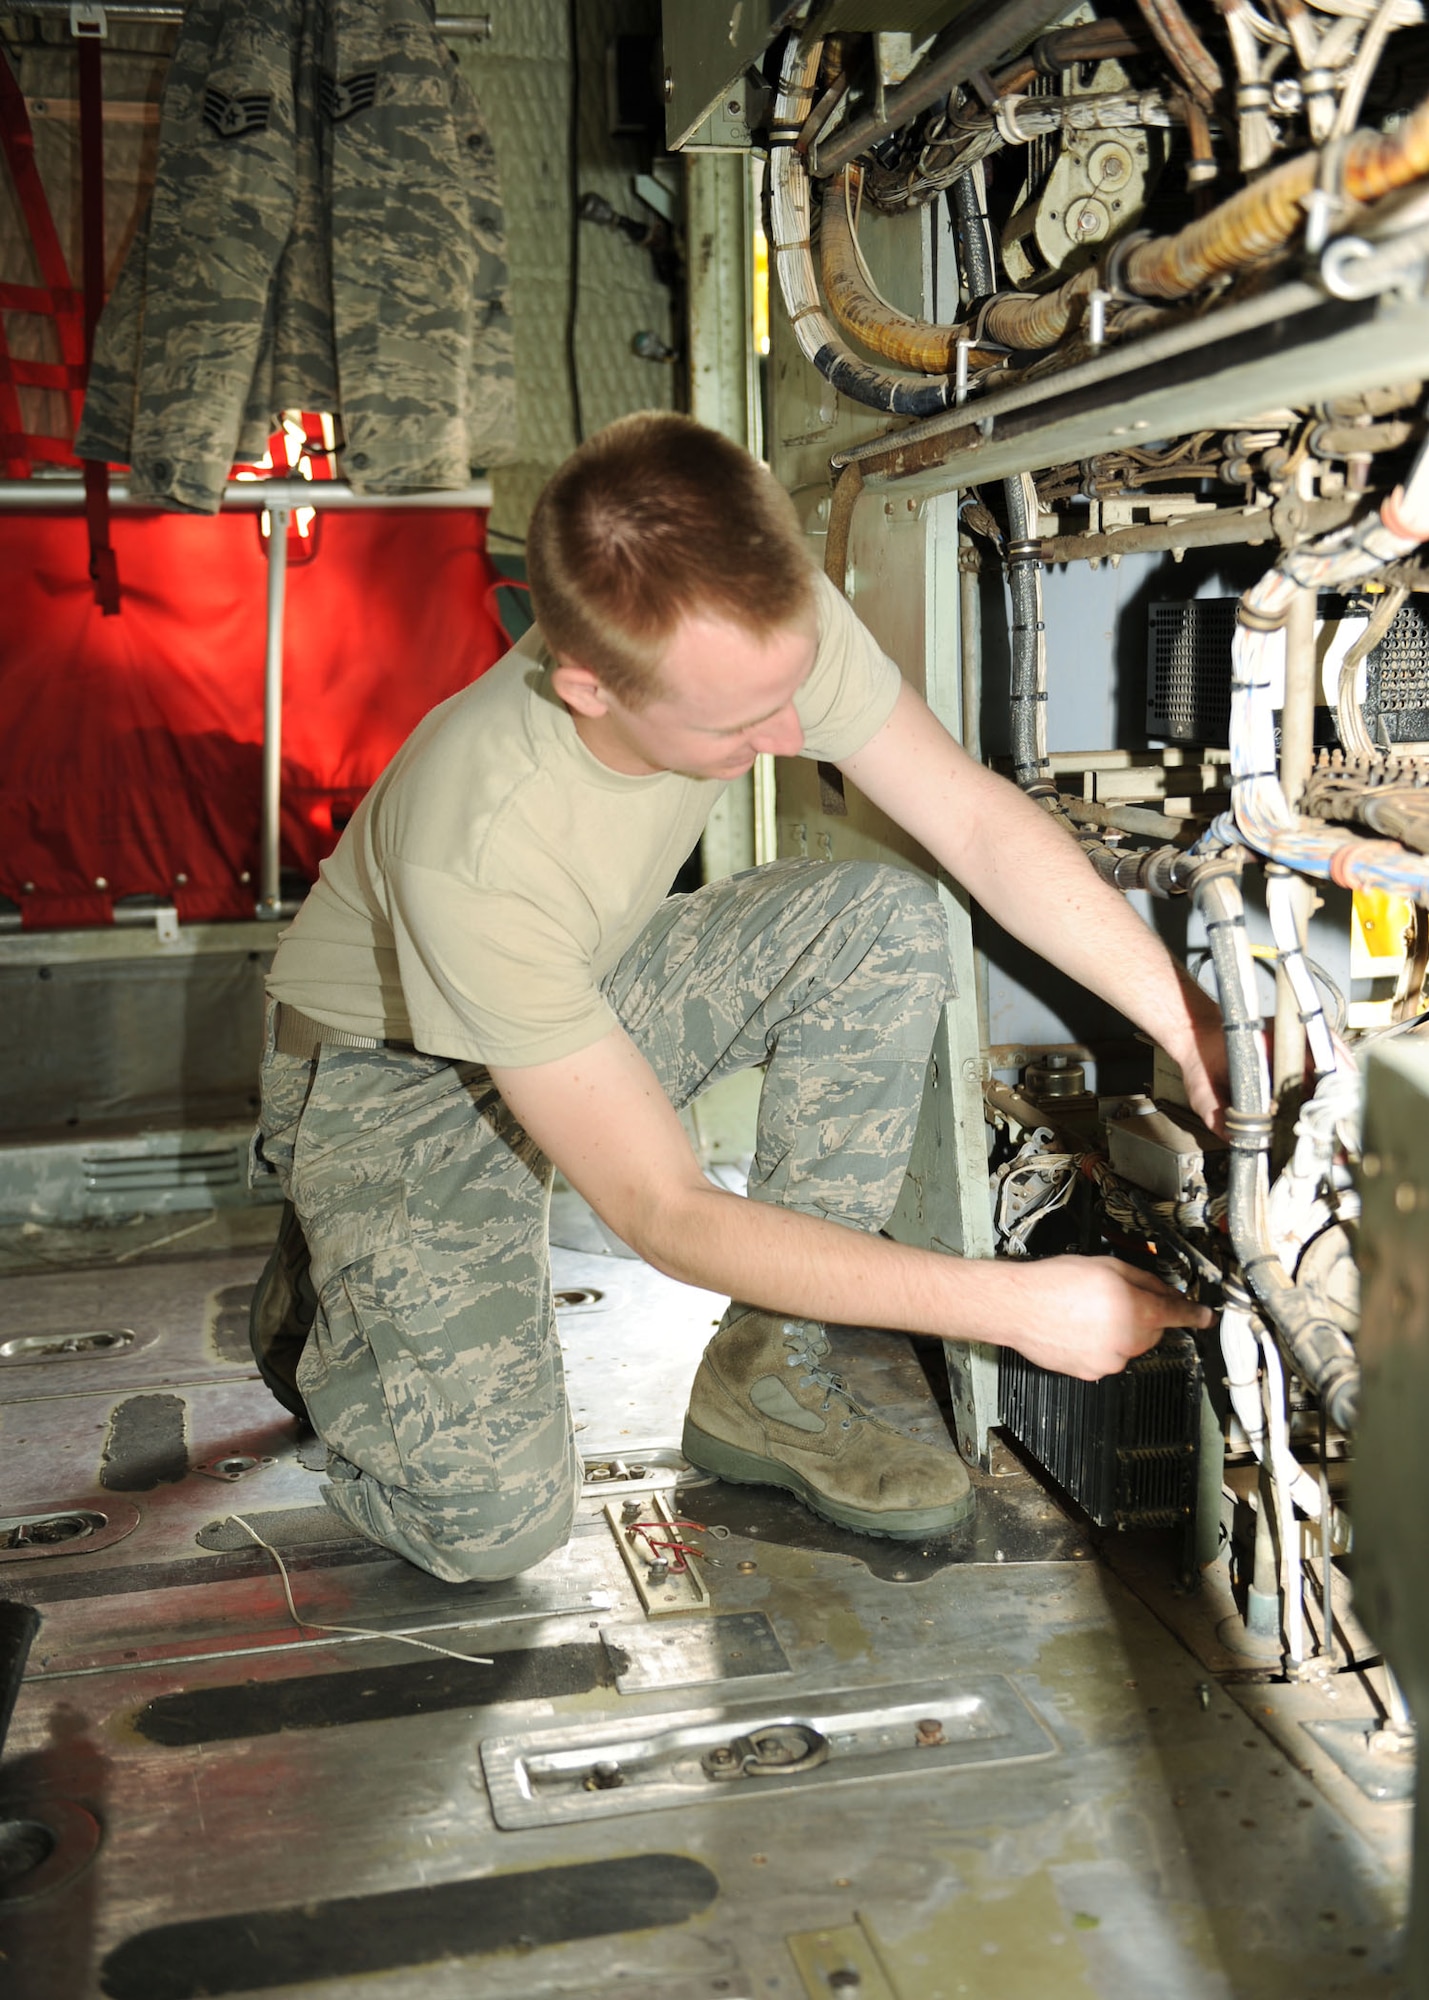 SCOTT AIR FORCE BASE, Ill. -- Airman 1st Class Jeff Wilson, 19th Maintenance Squadron communications navigator at Little Rock Air Force Base, Ark., helps remove hazardous material and equipment from a C130-E.  The items removed from the plane can be reused at a later time. The aircraft is being prepared for the Scott Field Heritage Airpark. (U.S. Air Force photo/Airman 1st Class Tristin English)